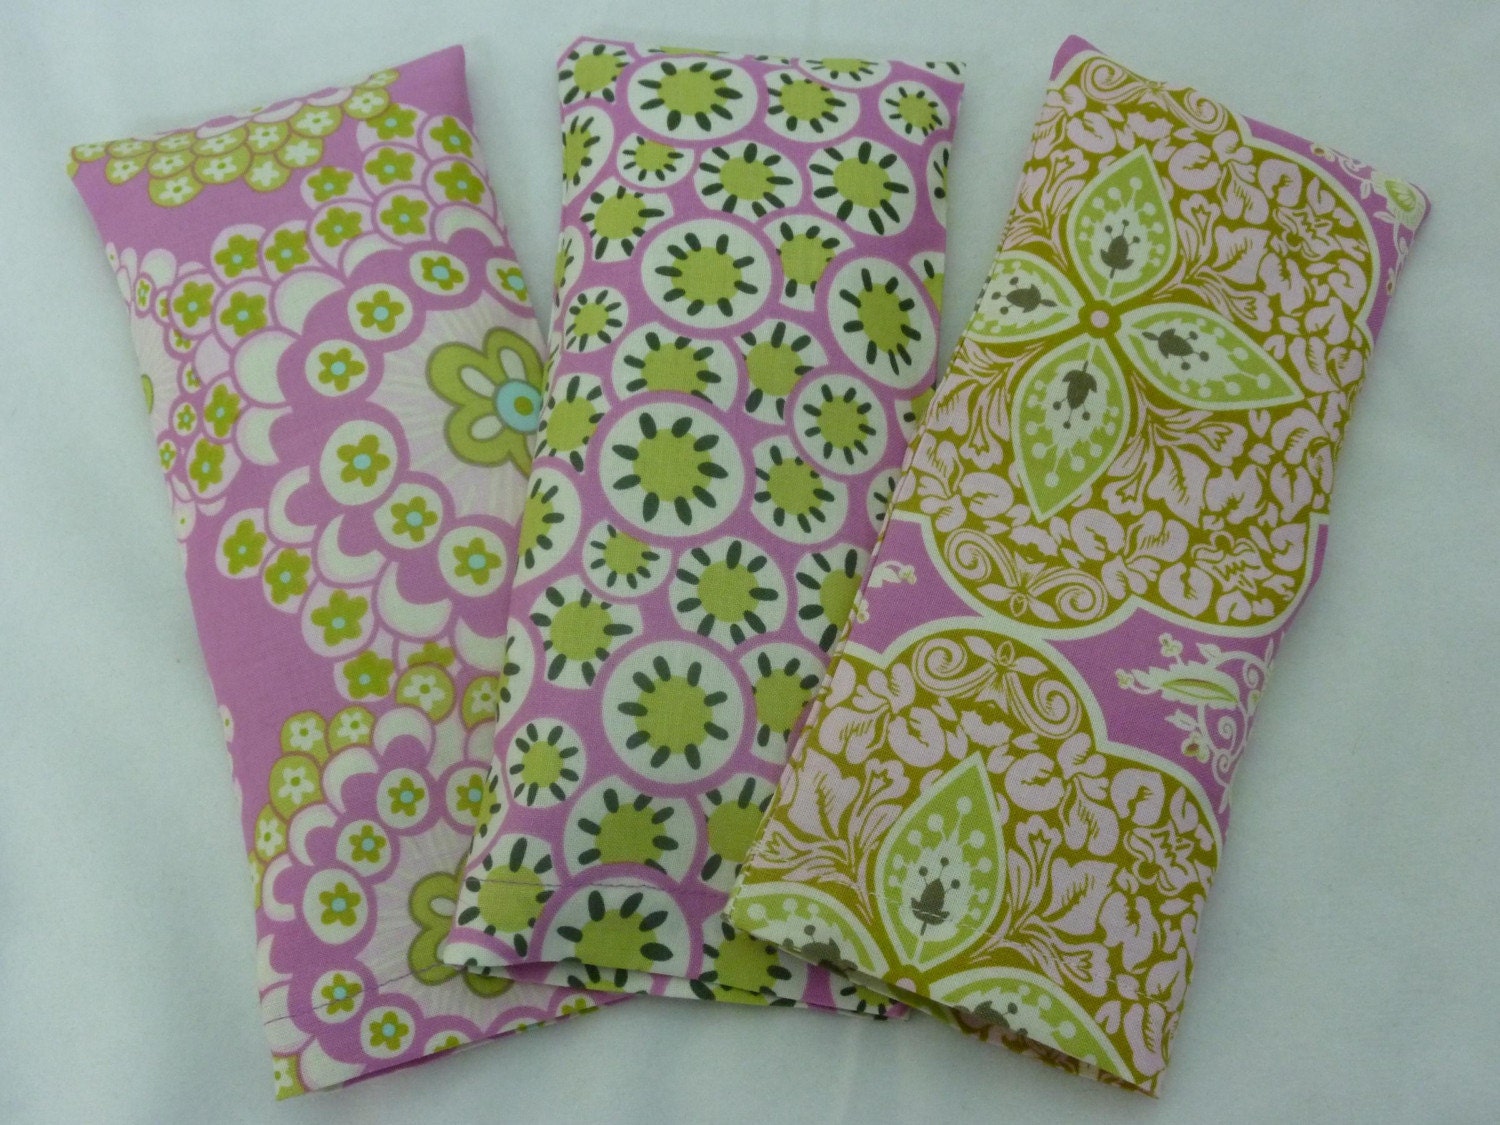 Soothing Aromatherapy Eye Pillow Set of Three with Removable Covers - Choice of Herbs